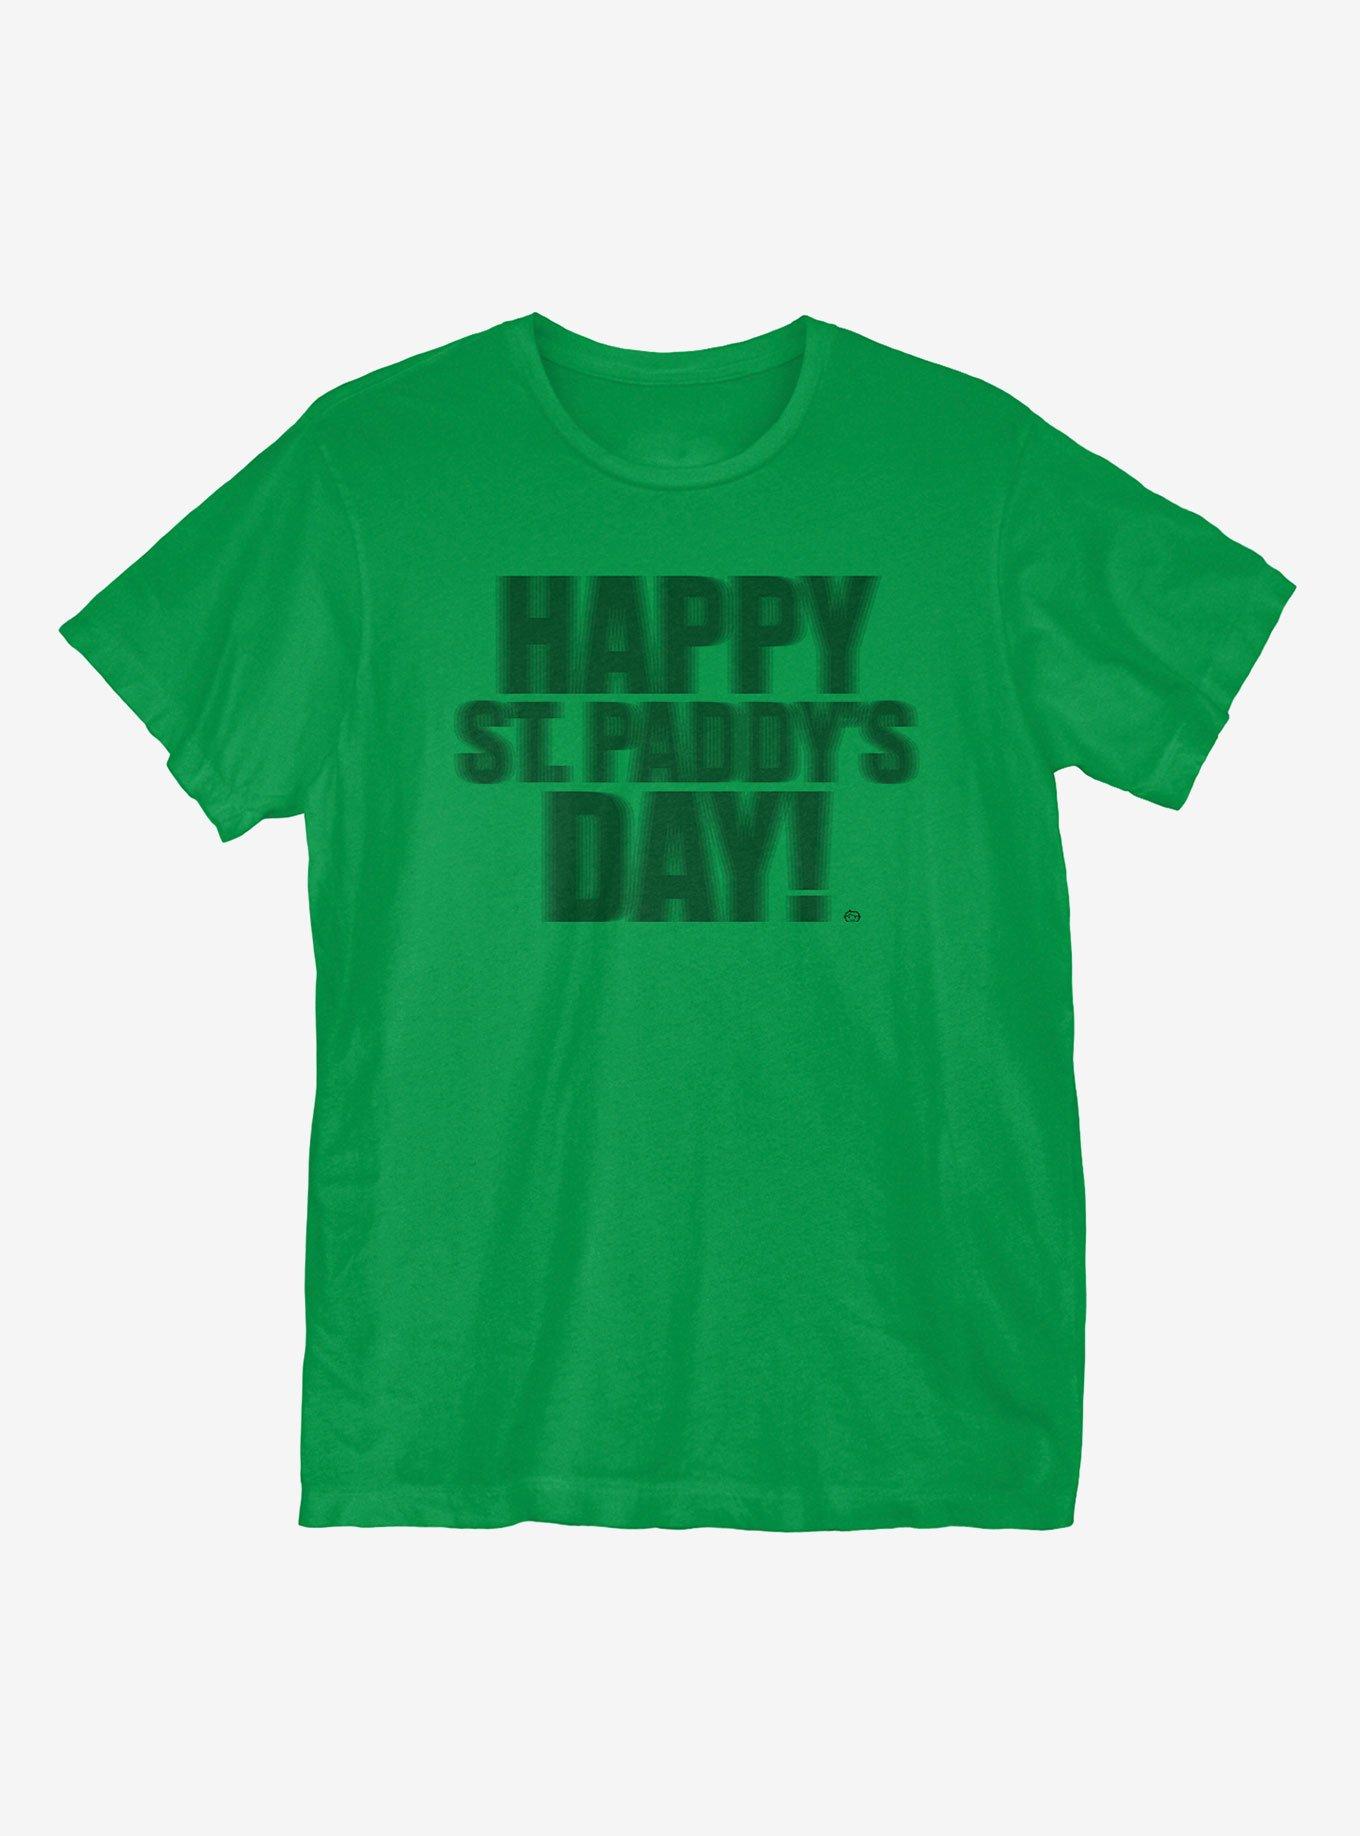 St. Patrick's Day Blurred Lines T-Shirt, KELLY GREEN, hi-res